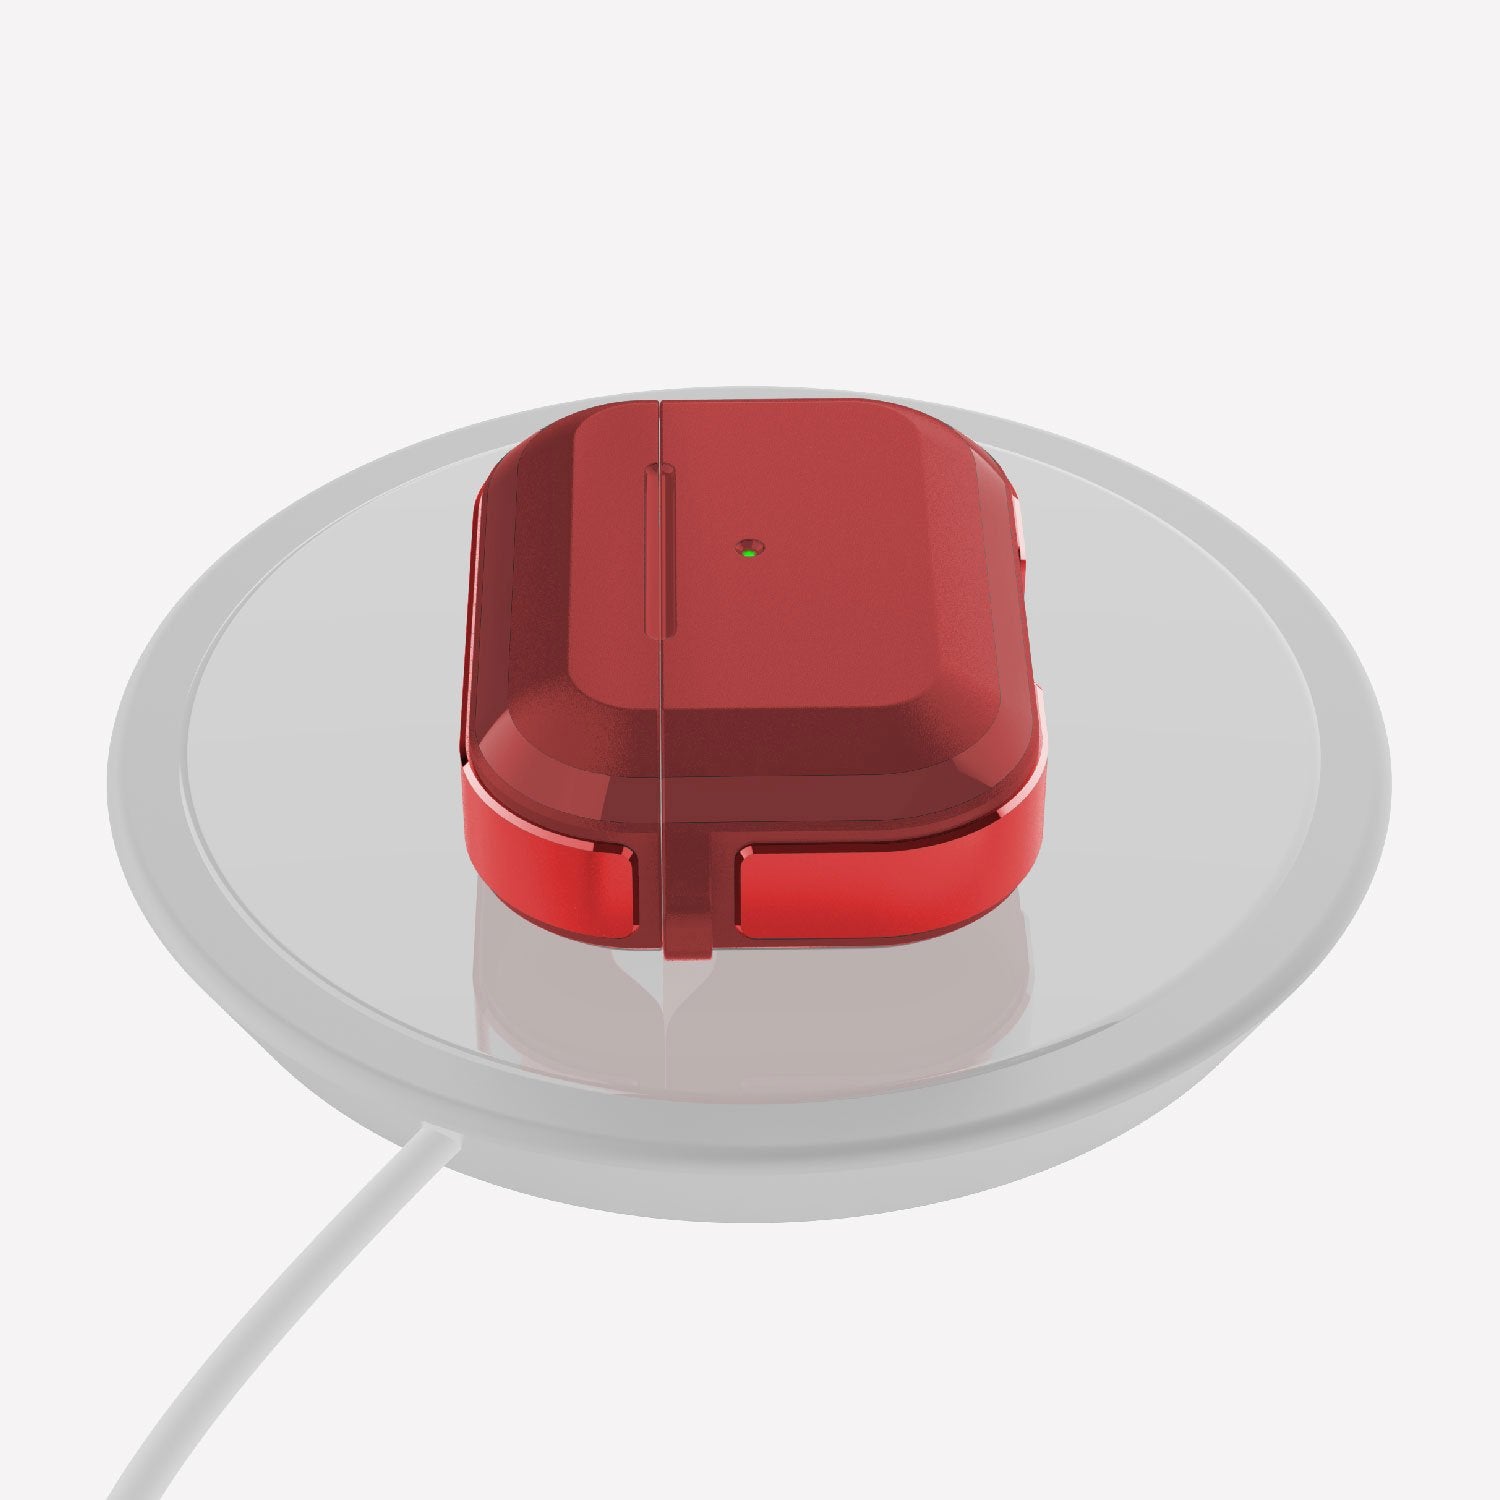 Raptic Trek Red on Apple AirPods Pro showing wireless charging compatibilities